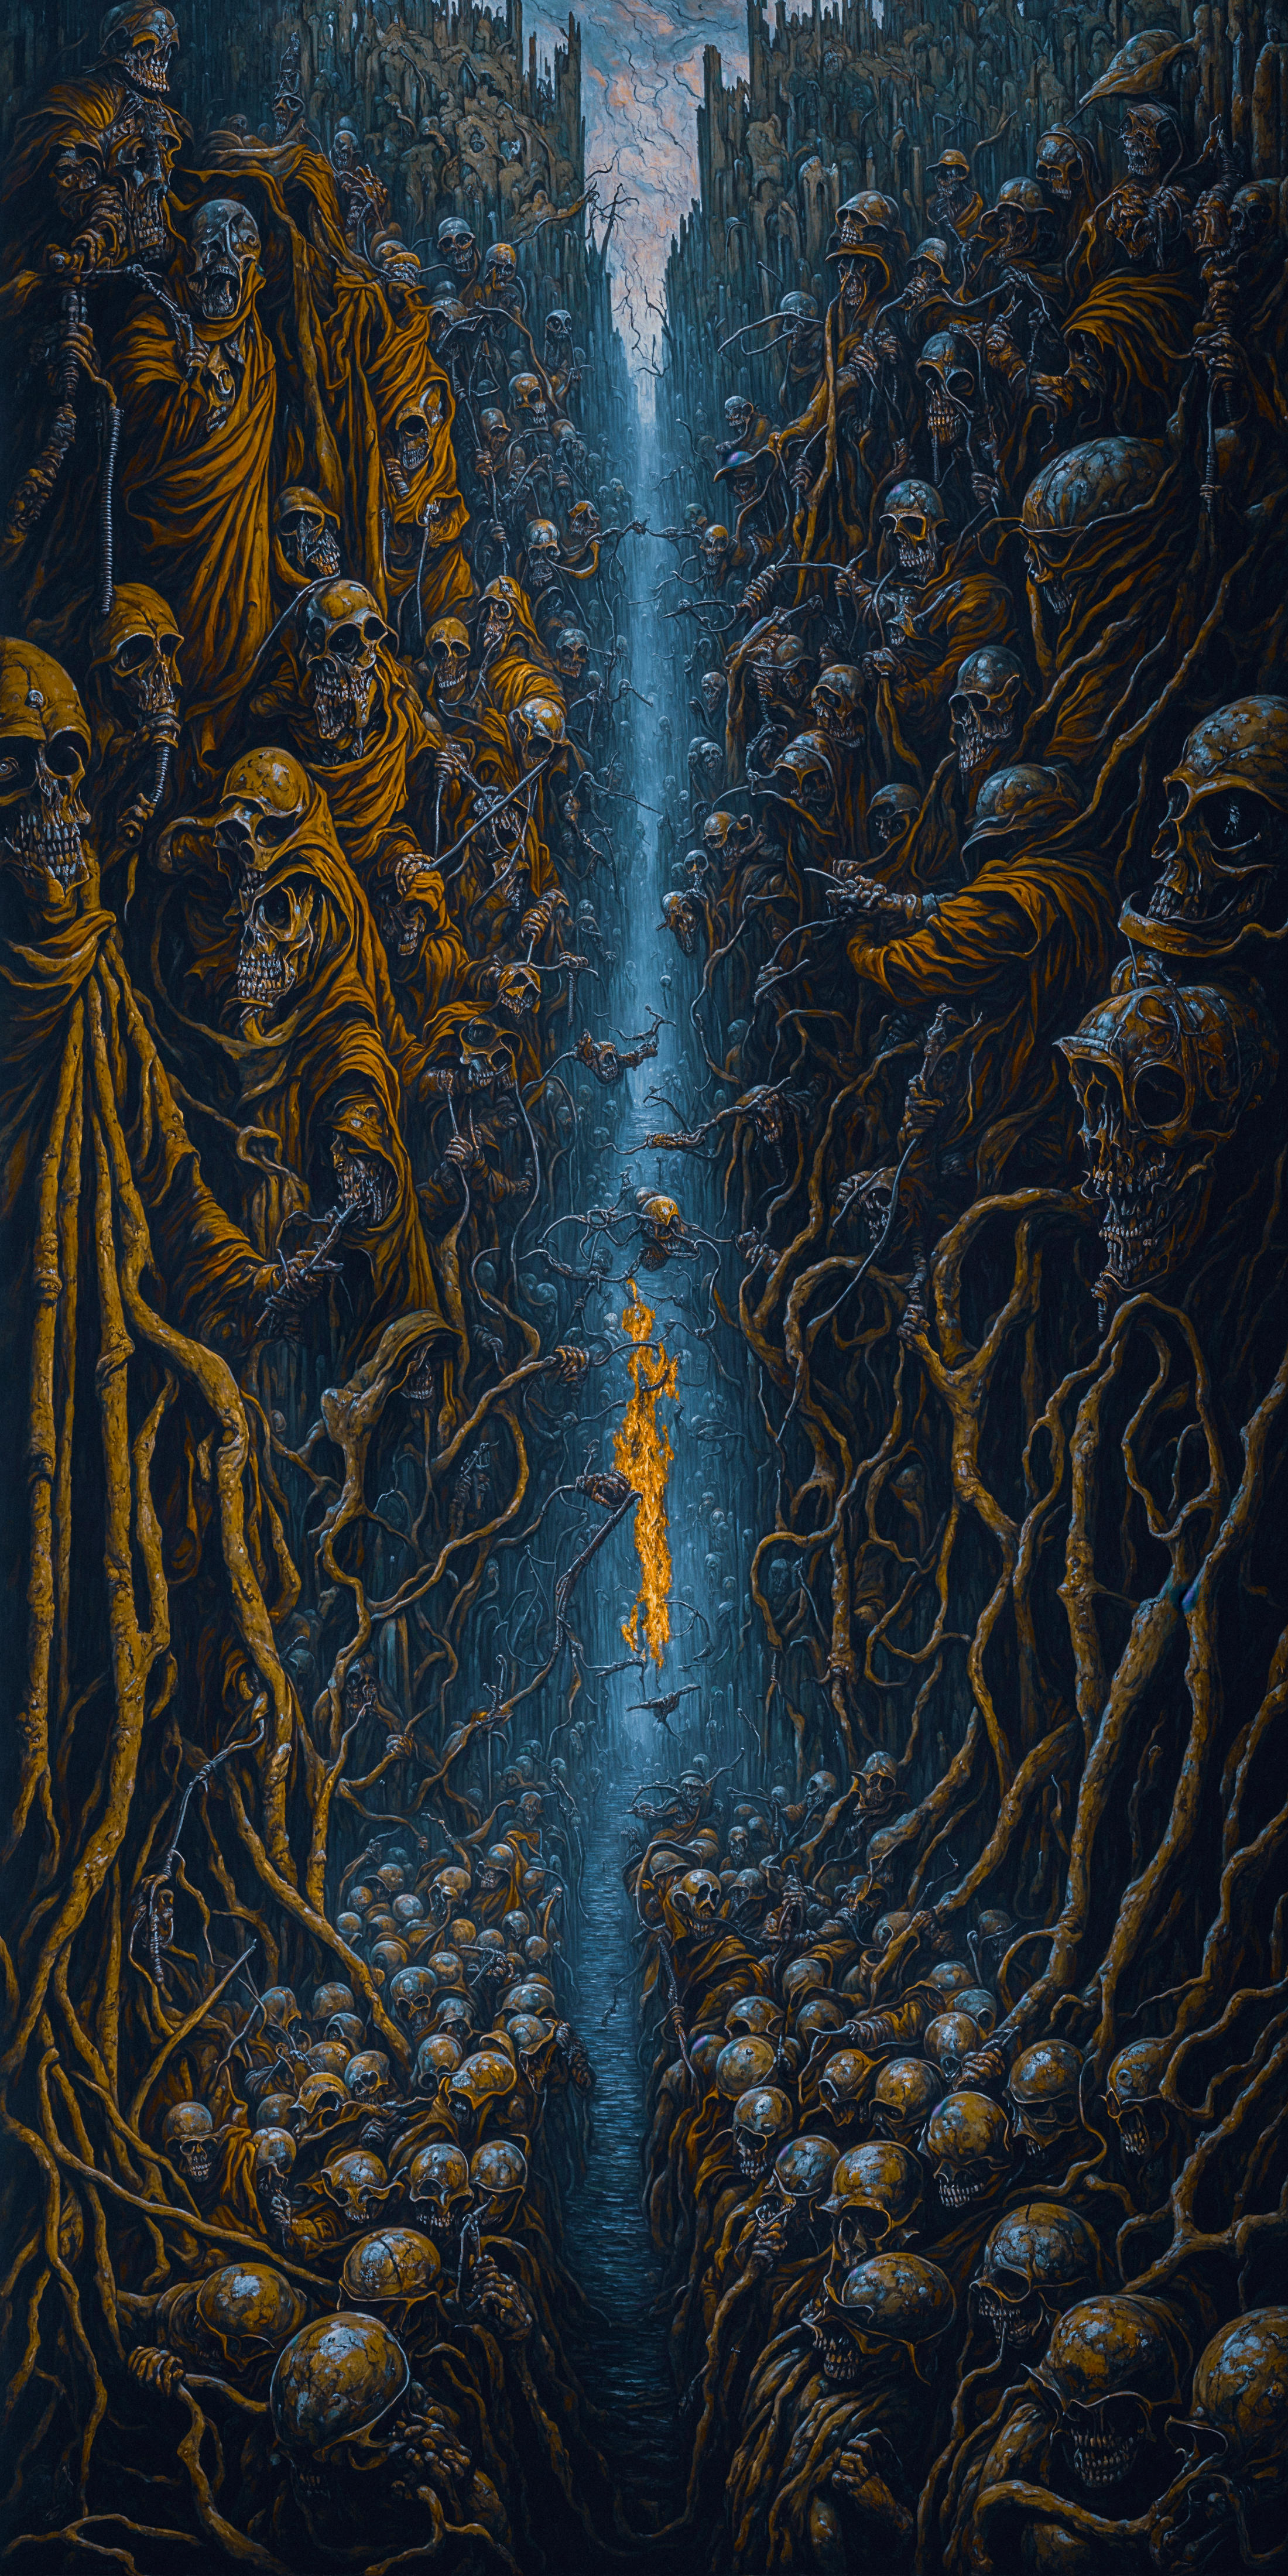 A Painting of Skeletons in a Dark Cave with a Fire in the Middle